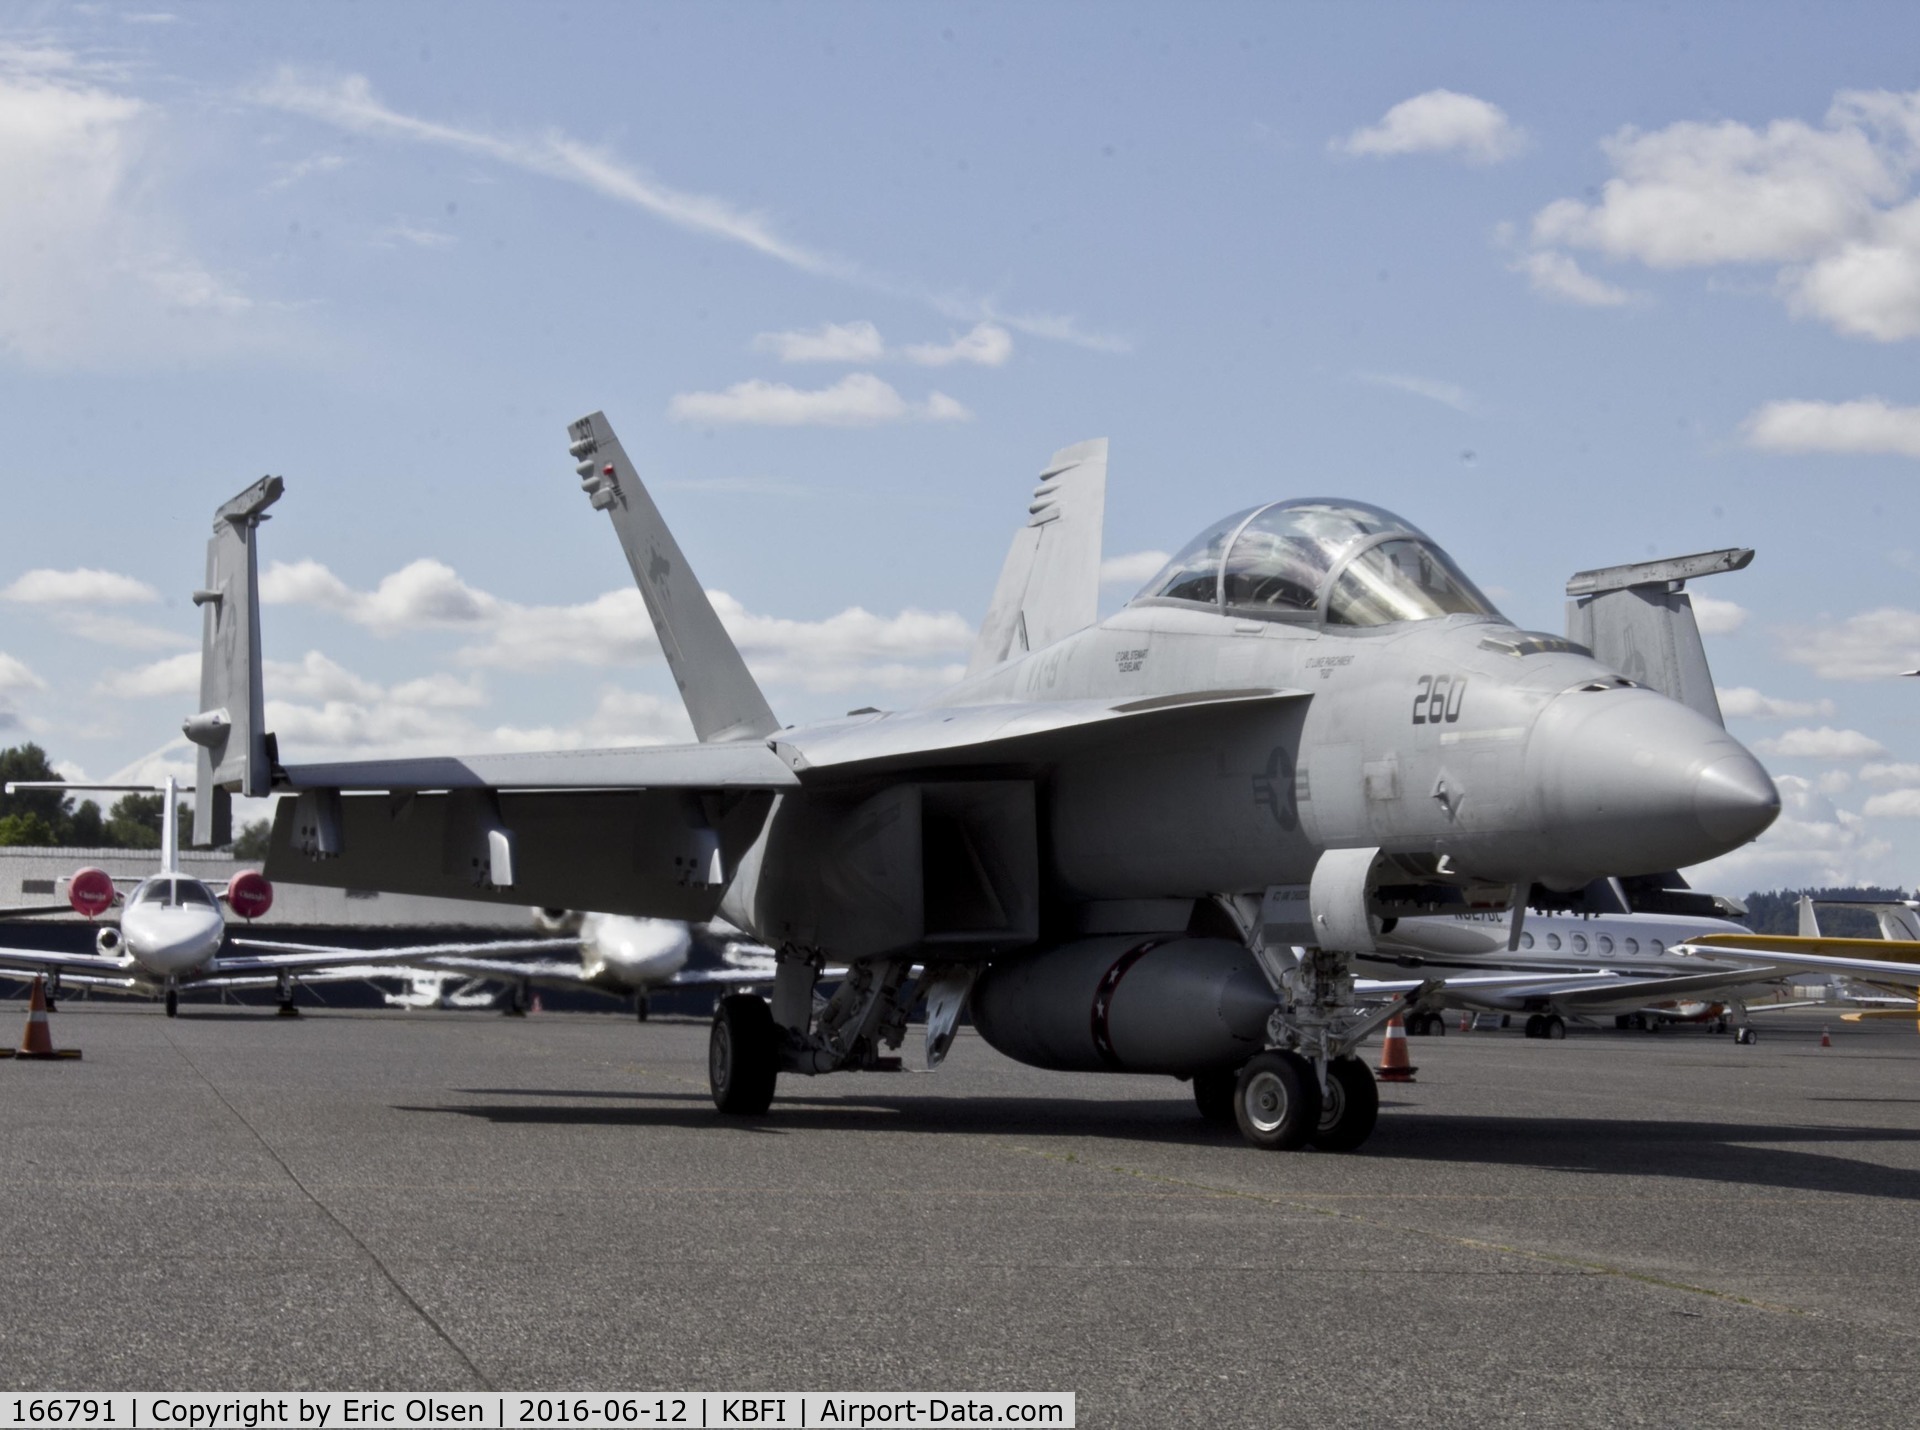 166791, Boeing F/A-18F Super Hornet C/N F164, XE 260 at Boeing Field.